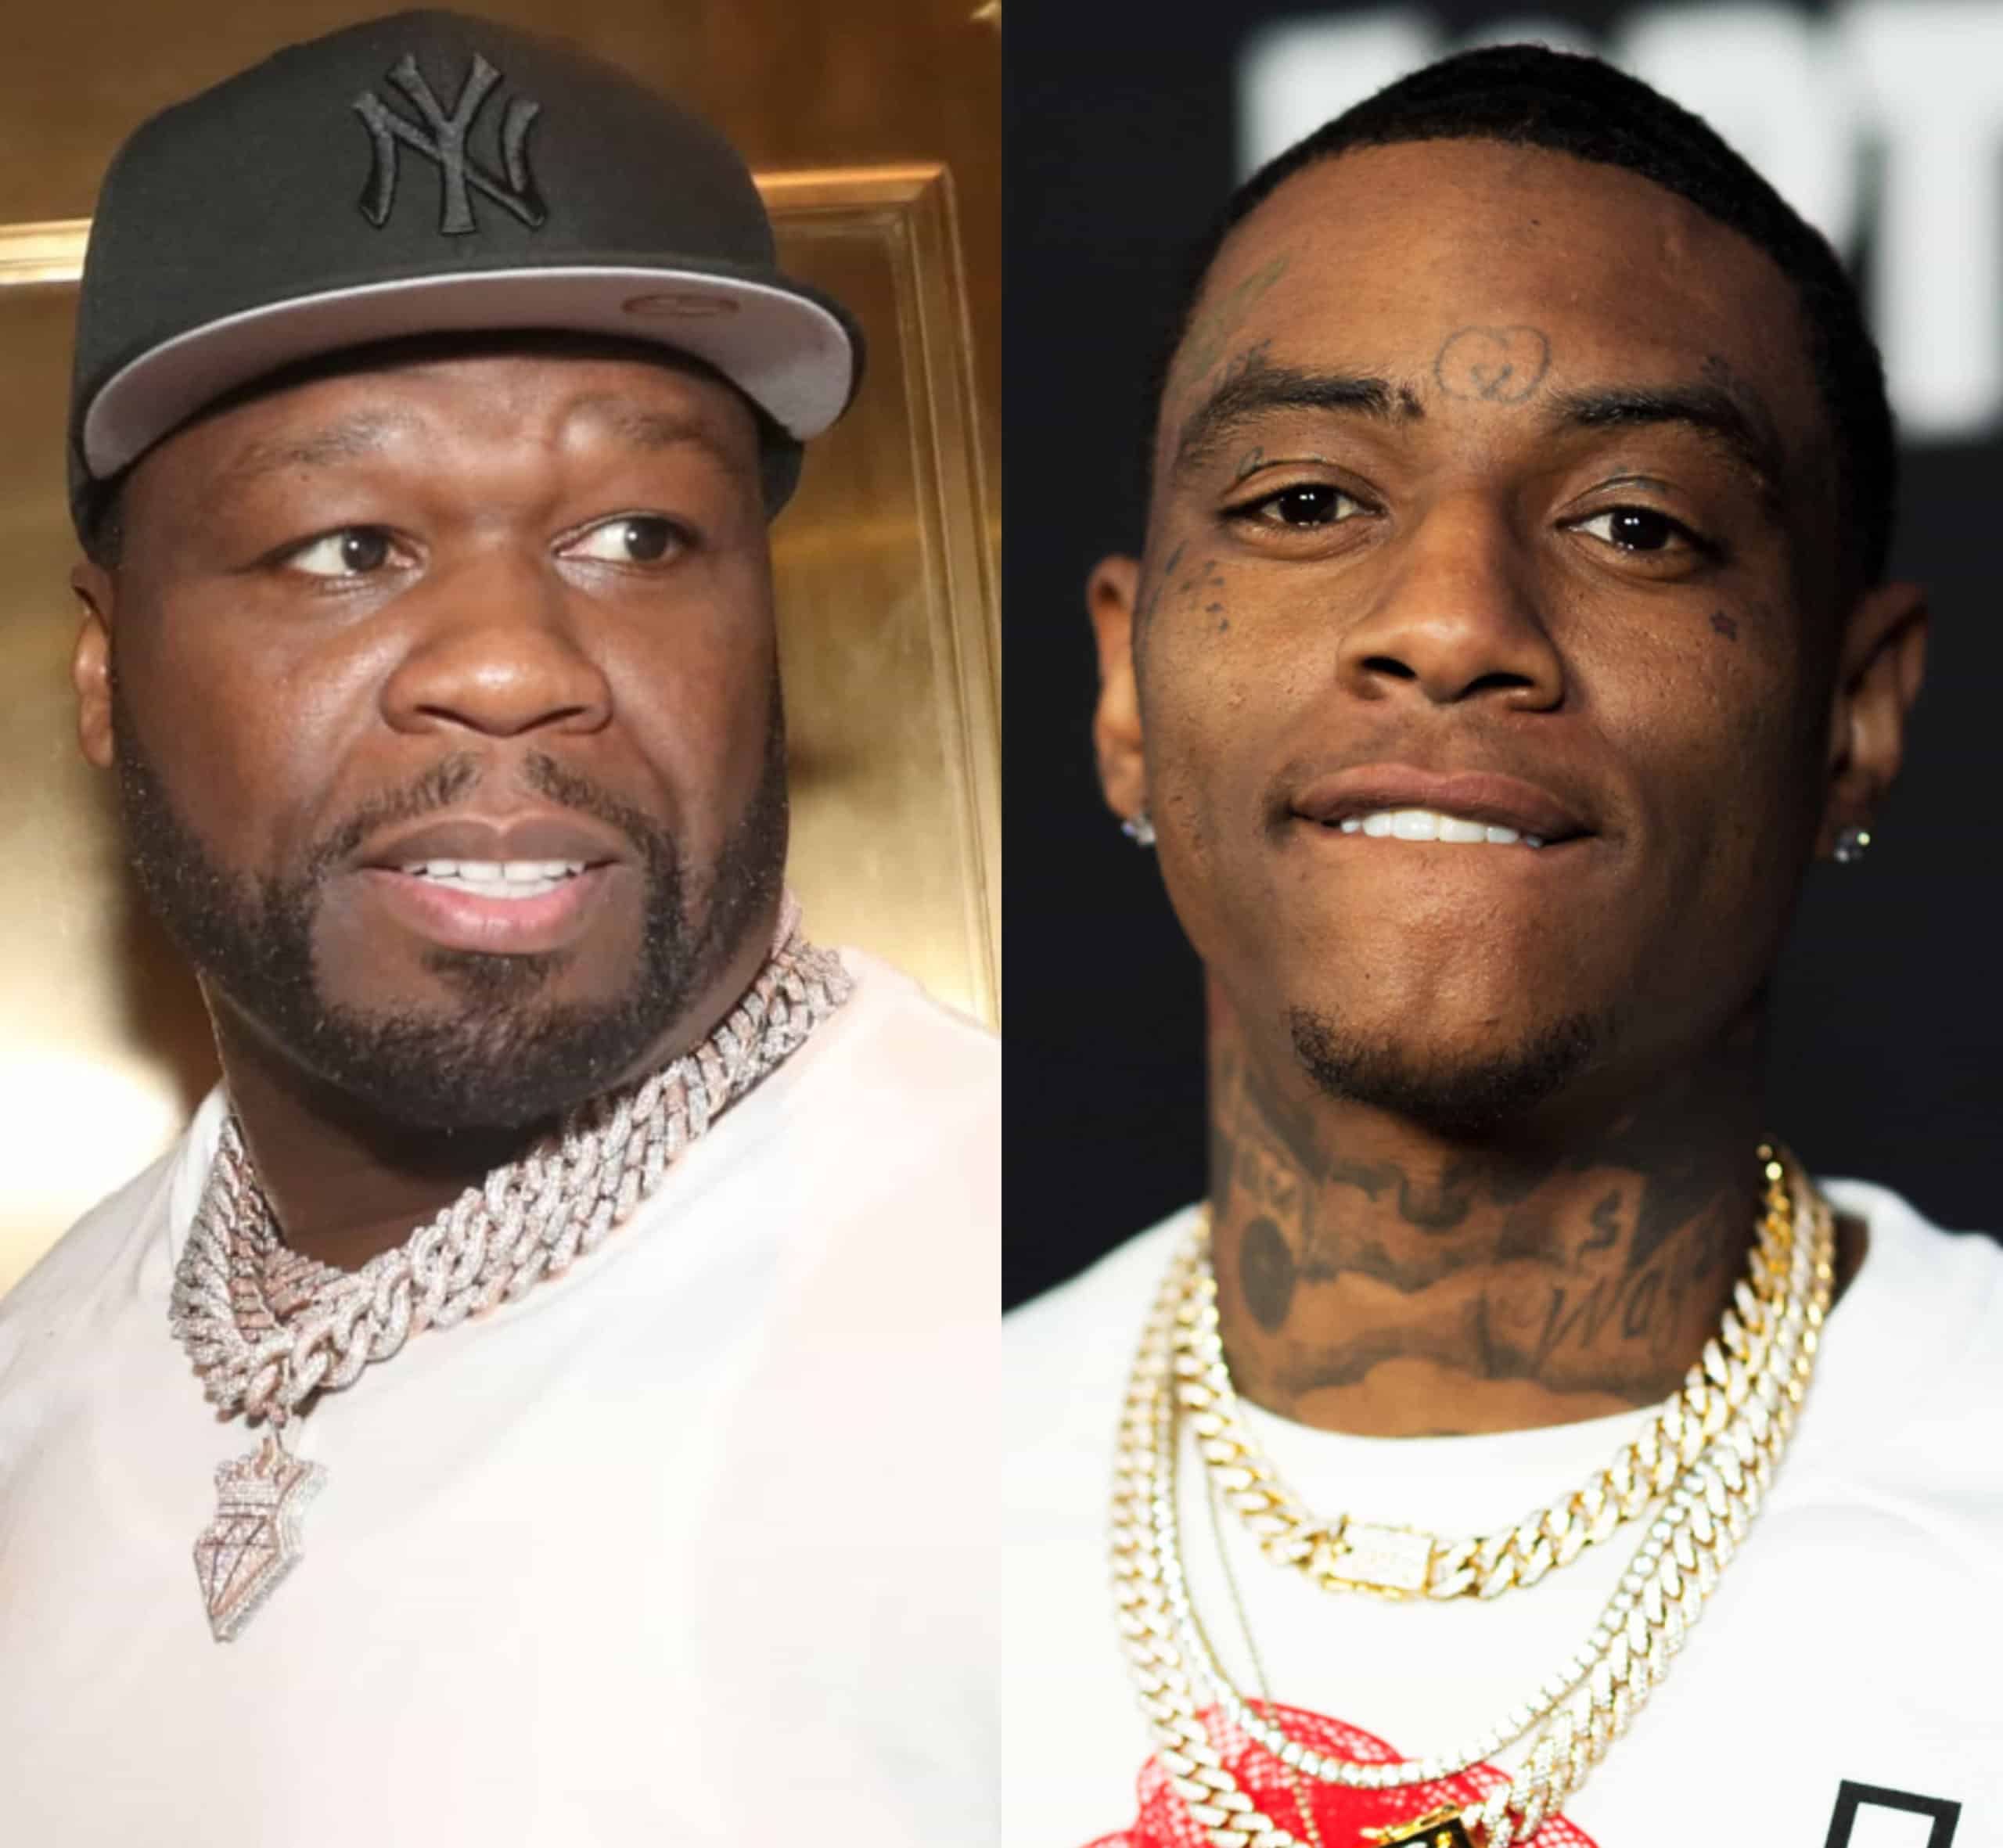 50 Cent Brags About Starting The Money Challenge, Soulja Boy Claims He Did It First